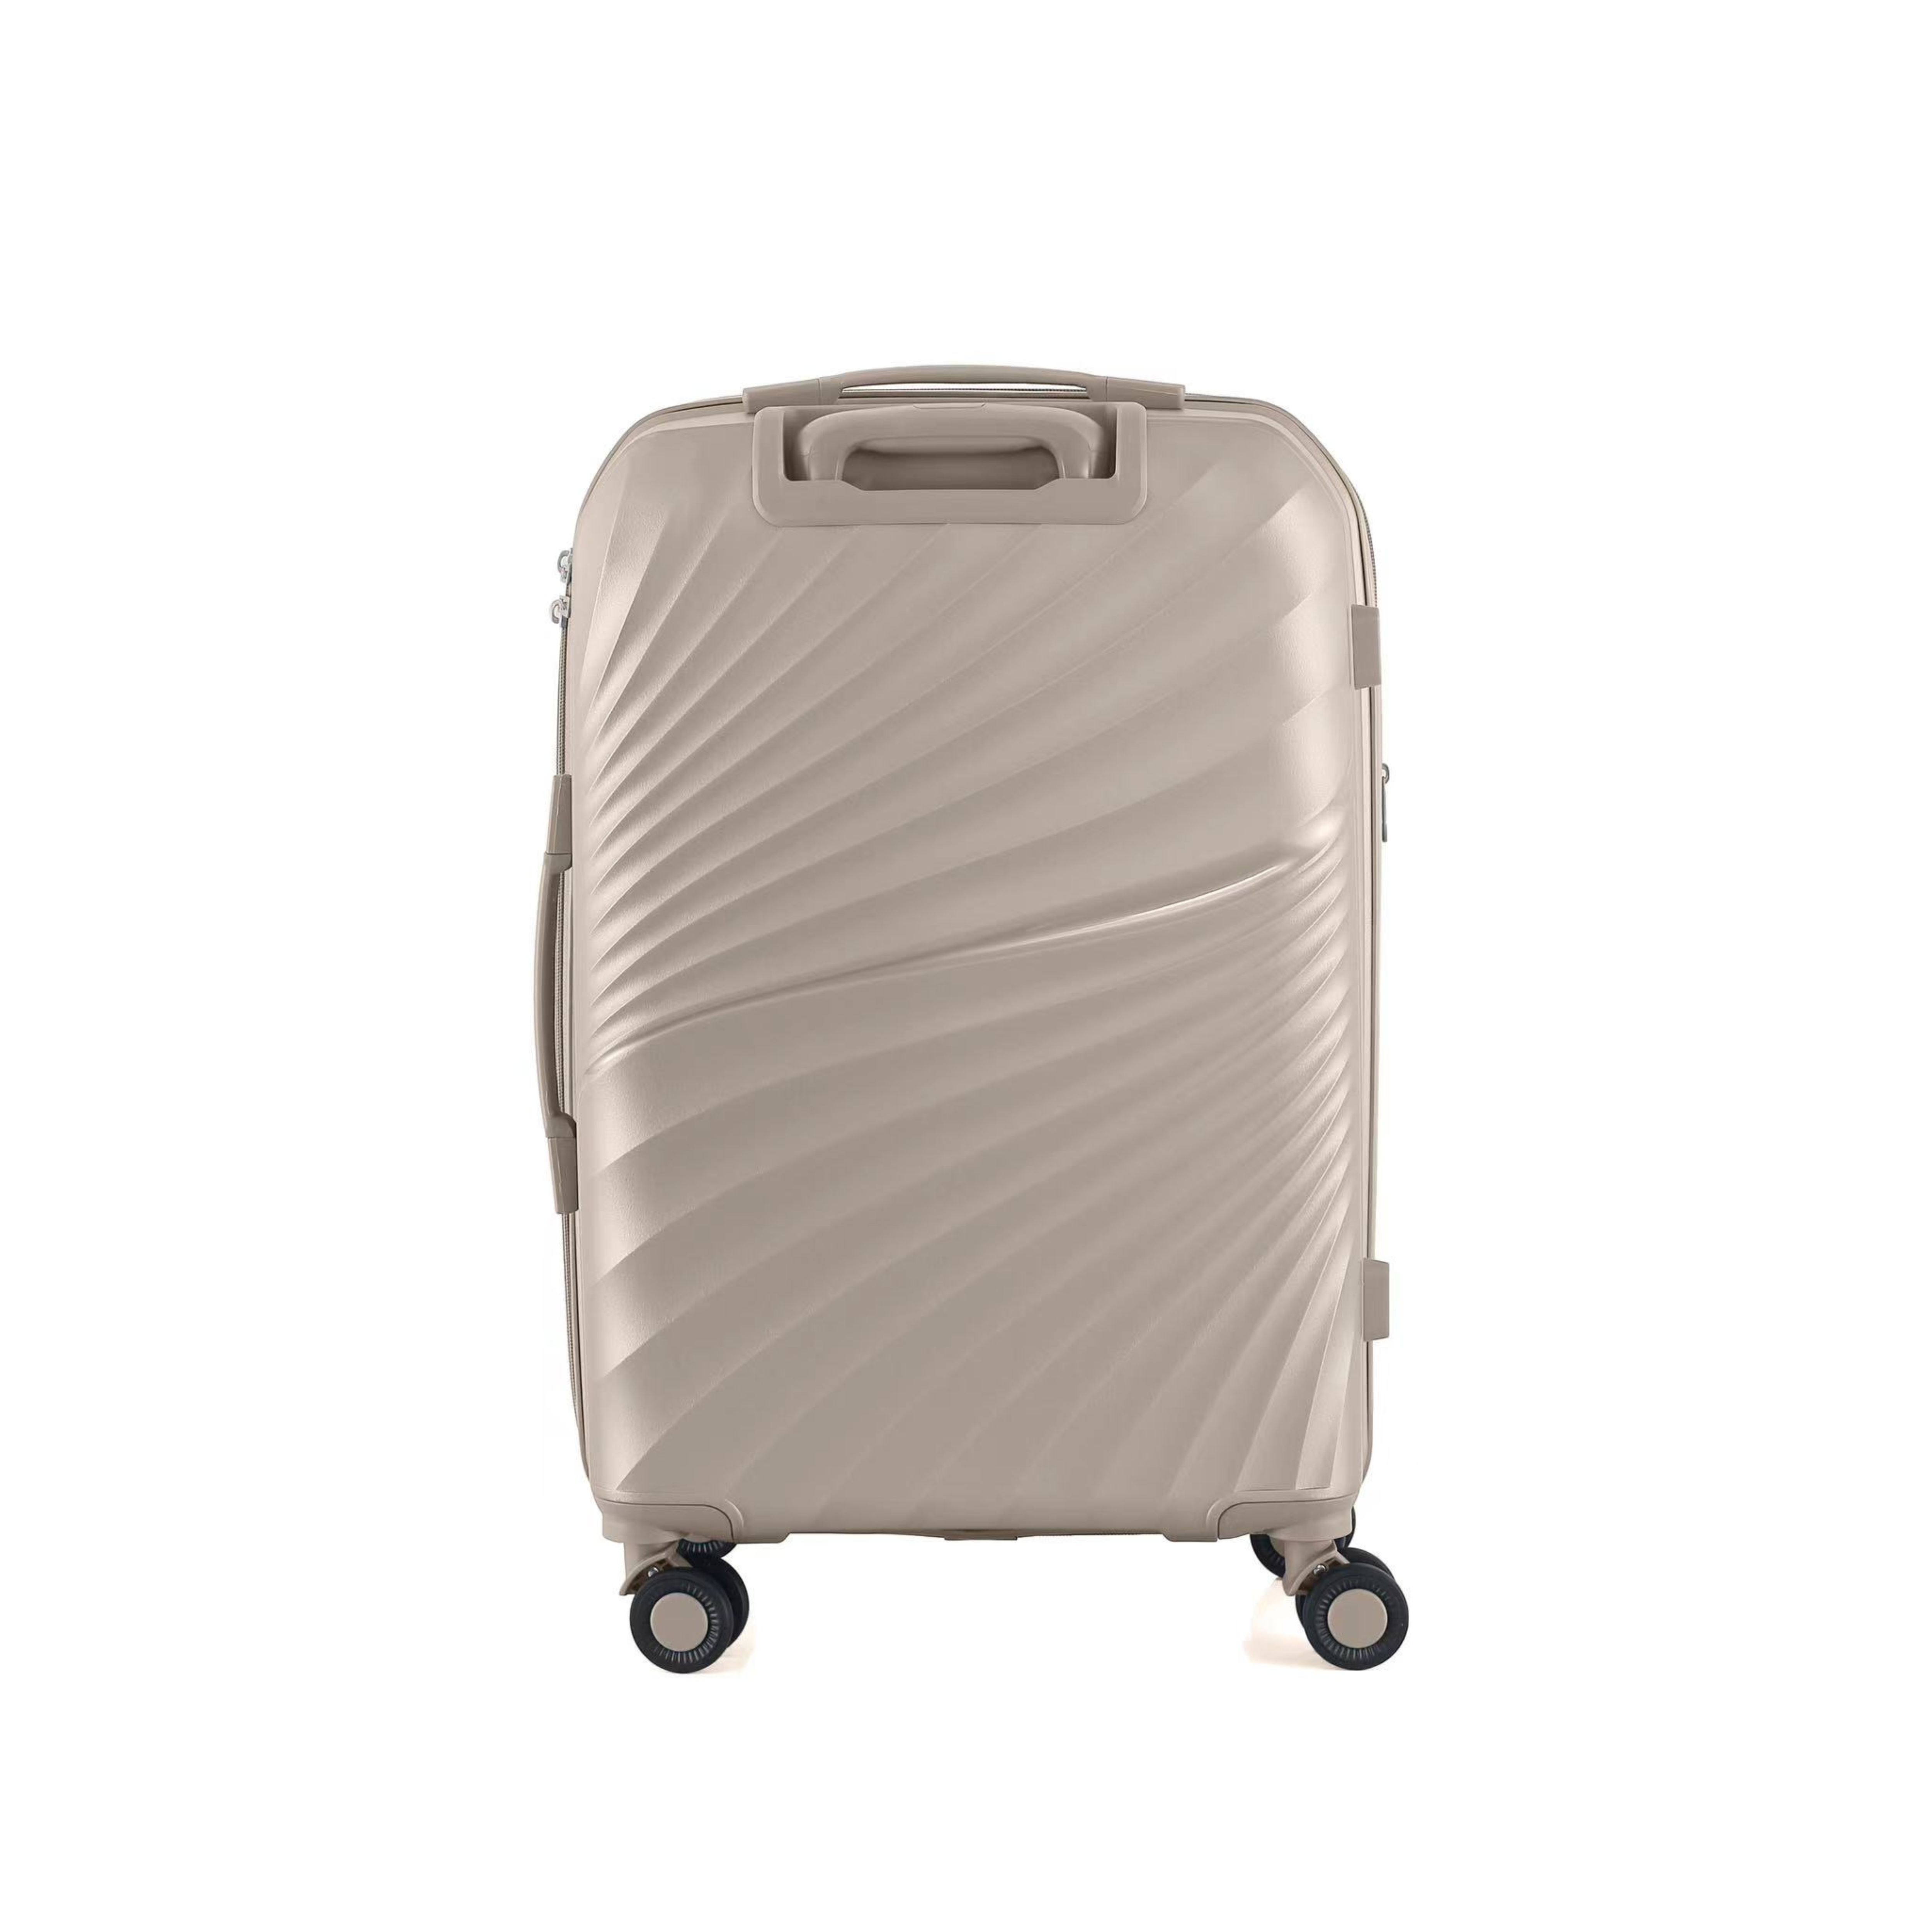 Travago The Dune Suitcase - Champagne